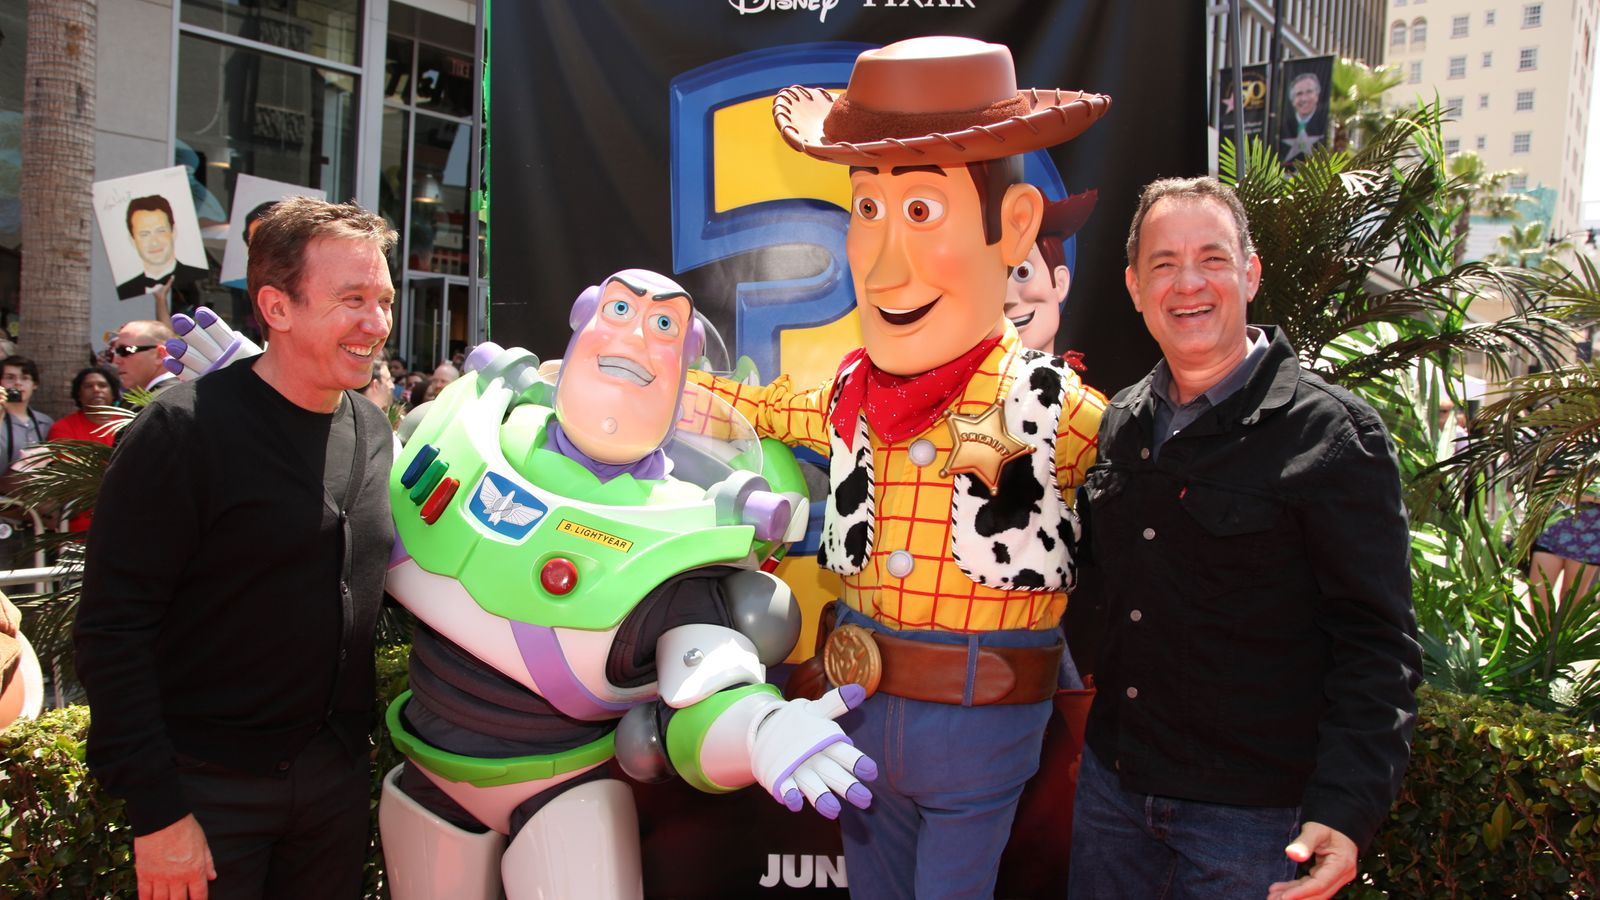 Toy Story 5 set to bring back Woody and Buzz Lightyear, Disney's Pixar boss says